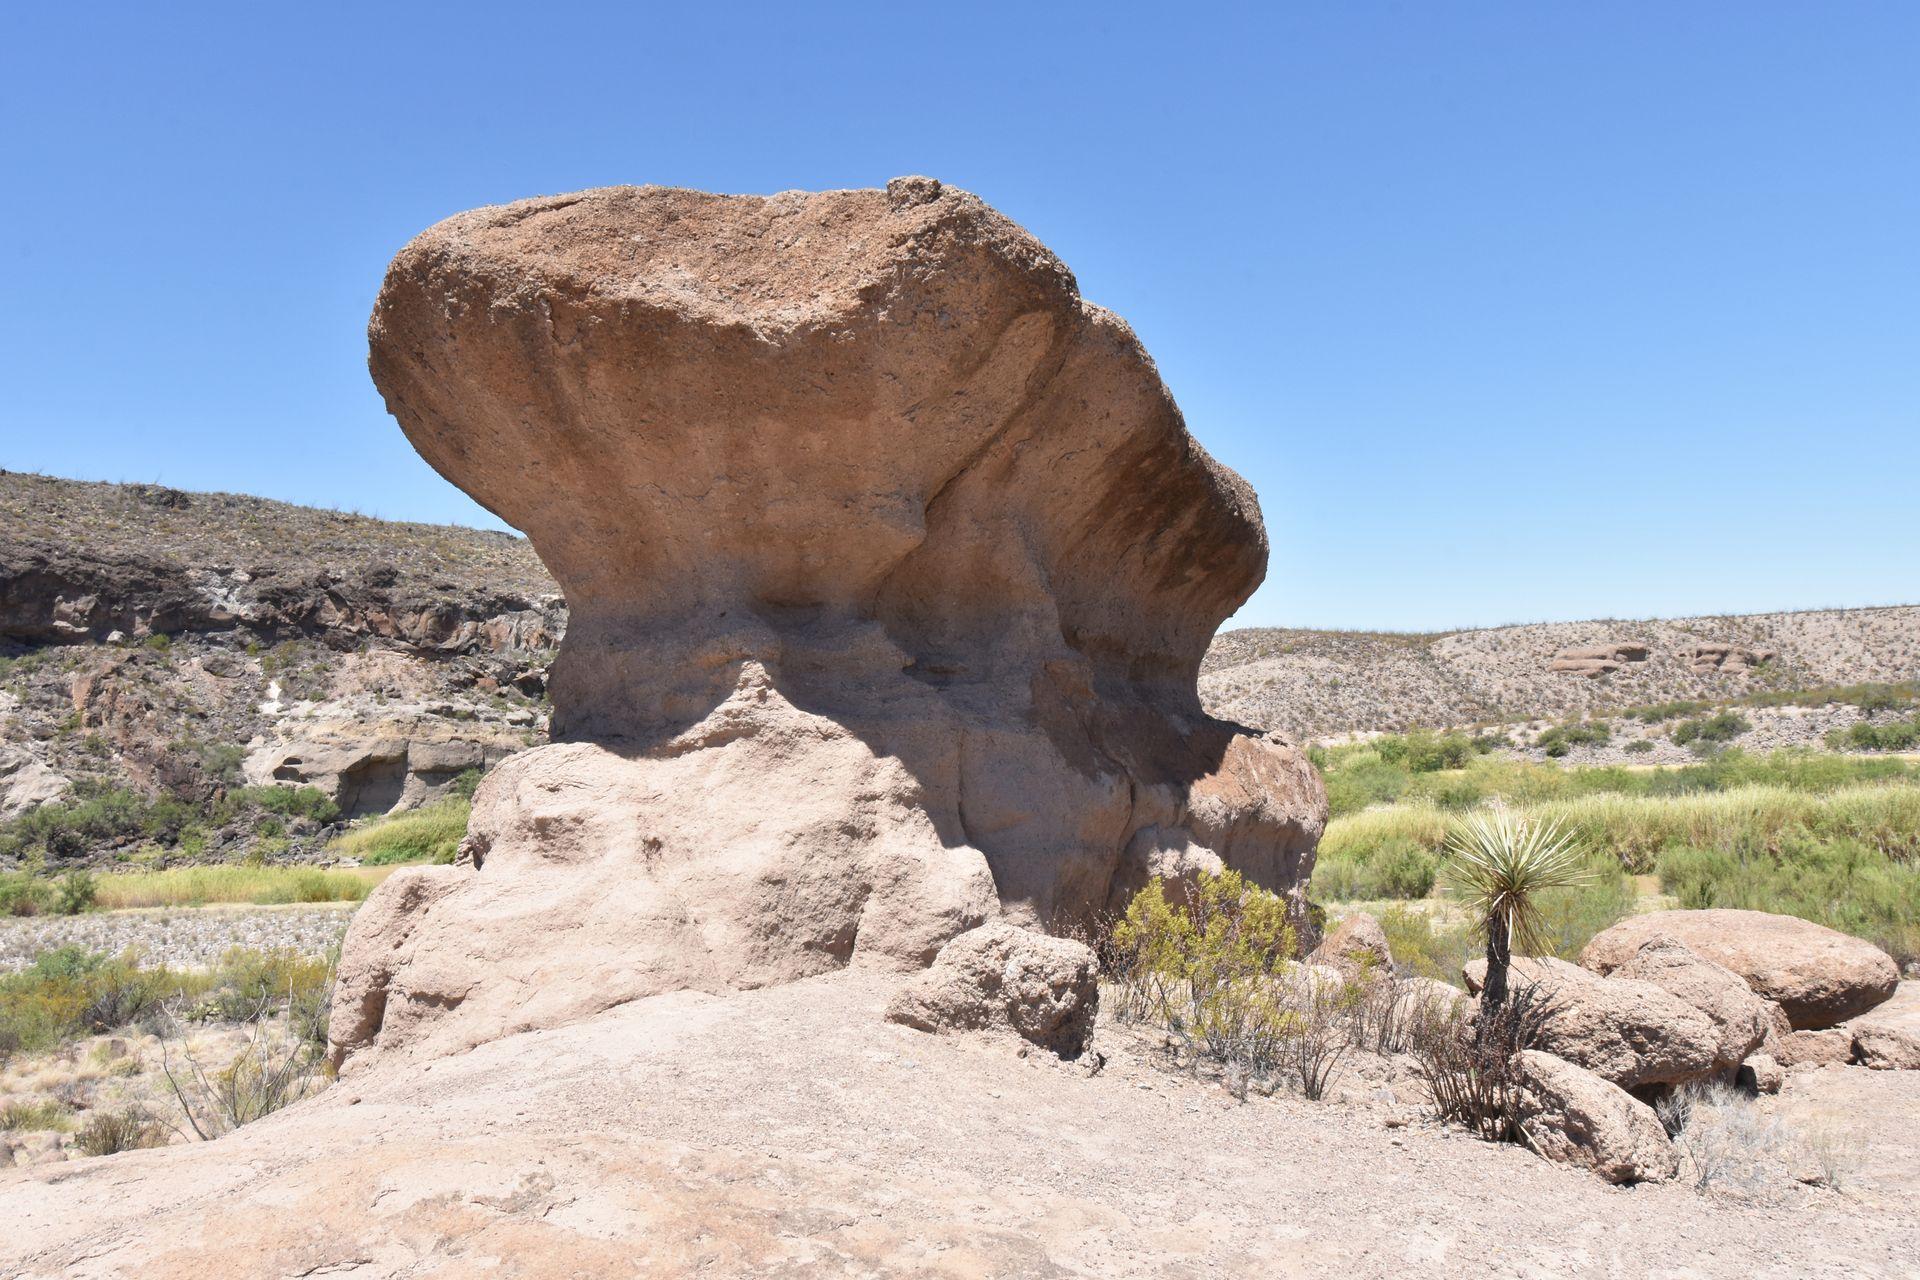 A large rock that is larger on top than it is on the bottom, surrounded by desert plants on the Hoodoo Trail.